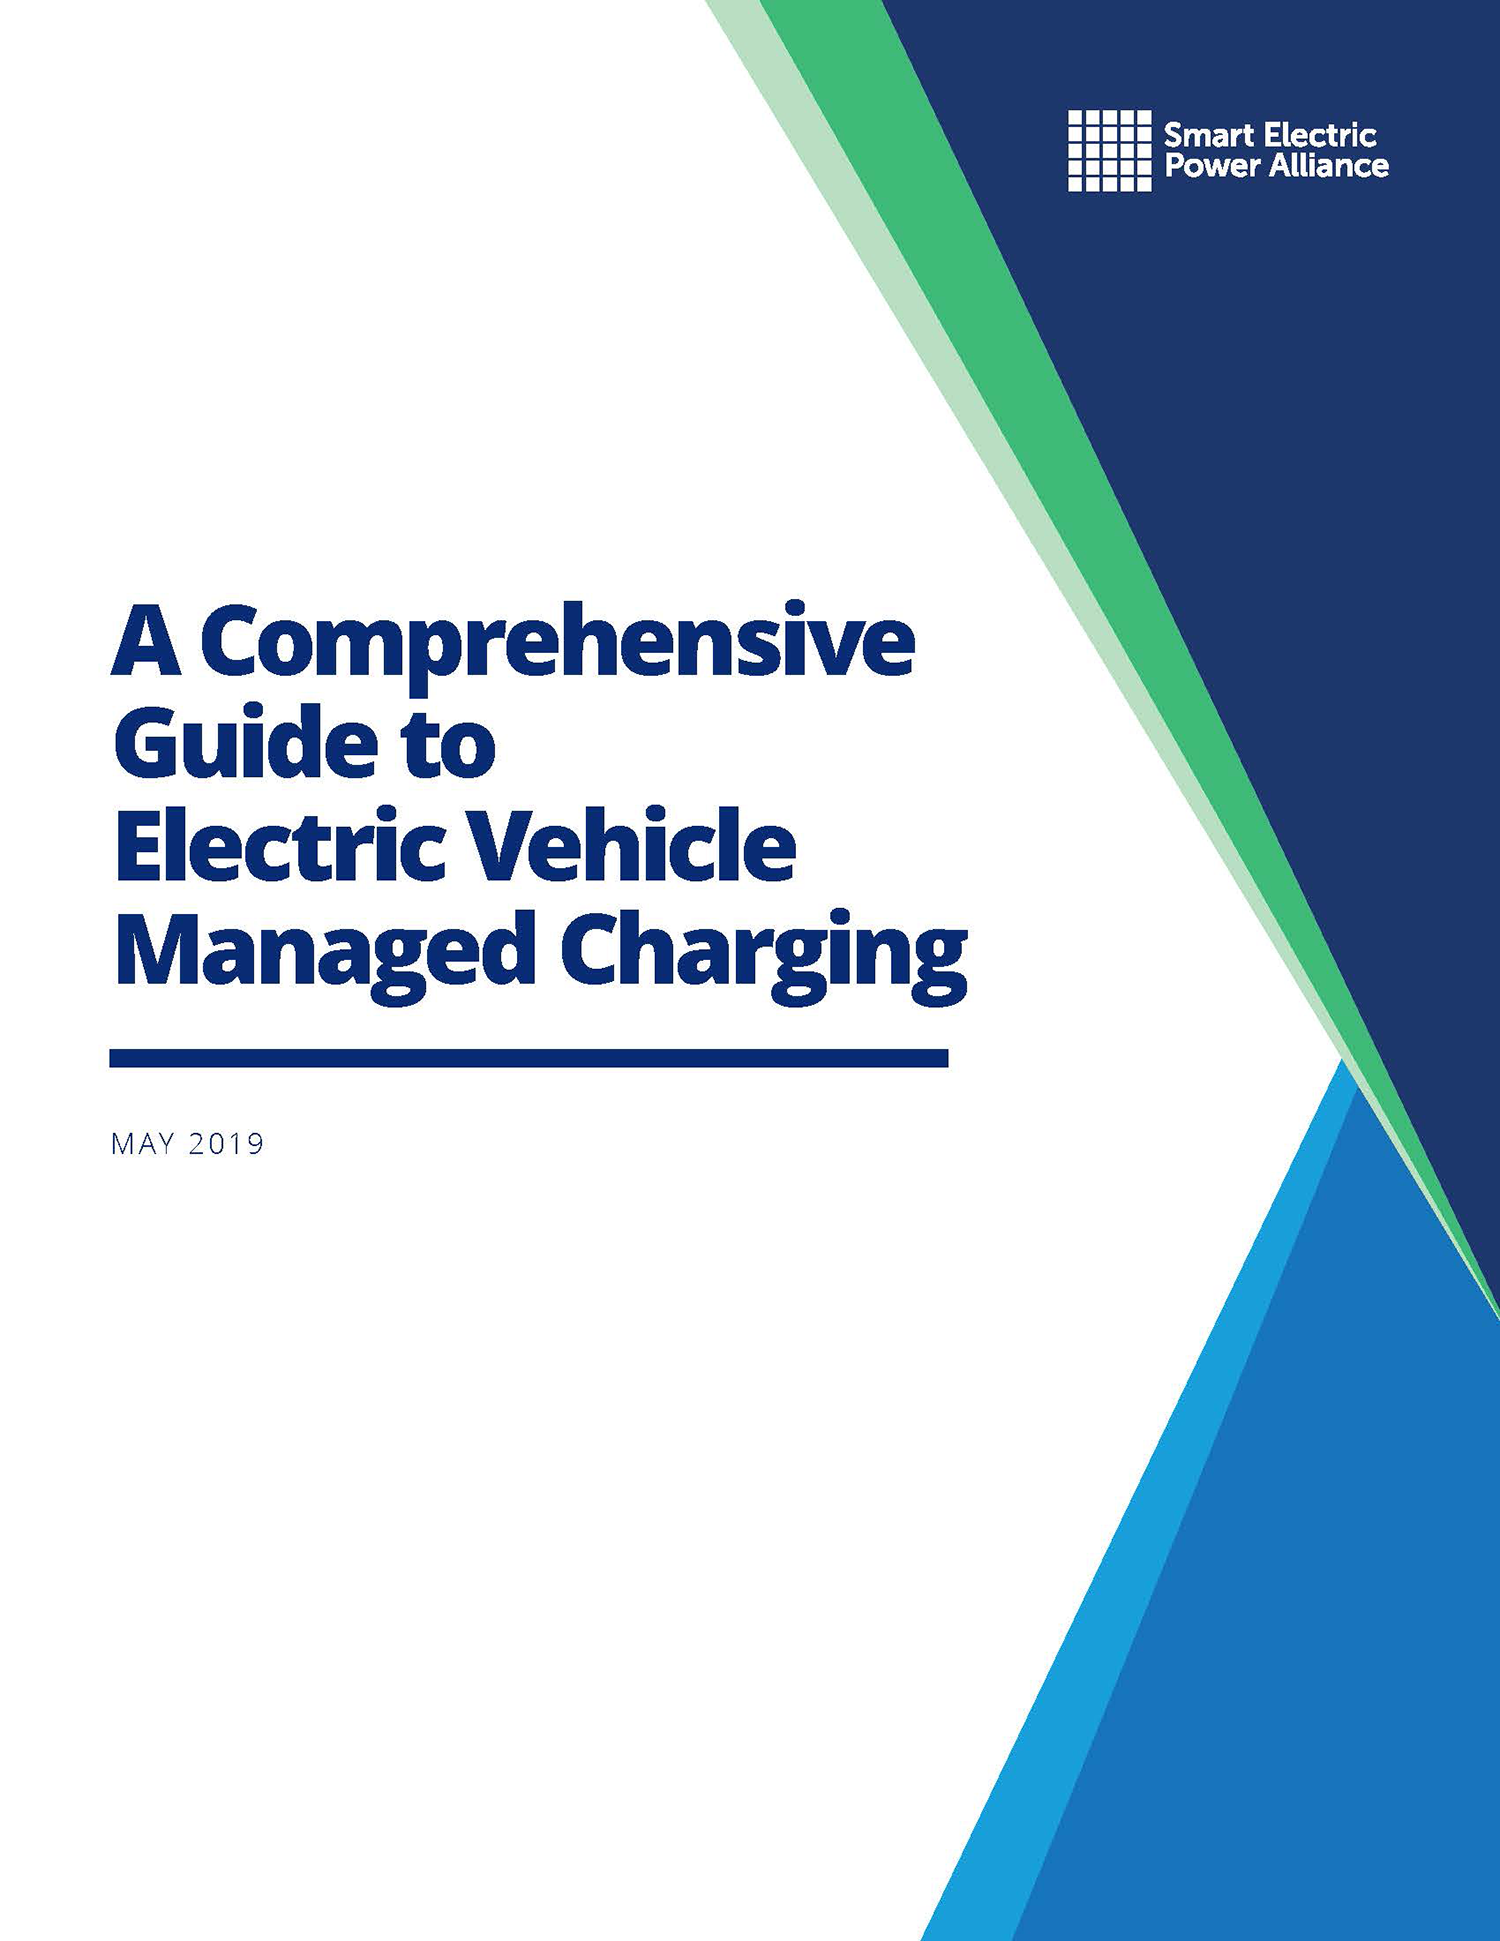 A Comprehensive Guide to Electric Vehicle Managed Charging